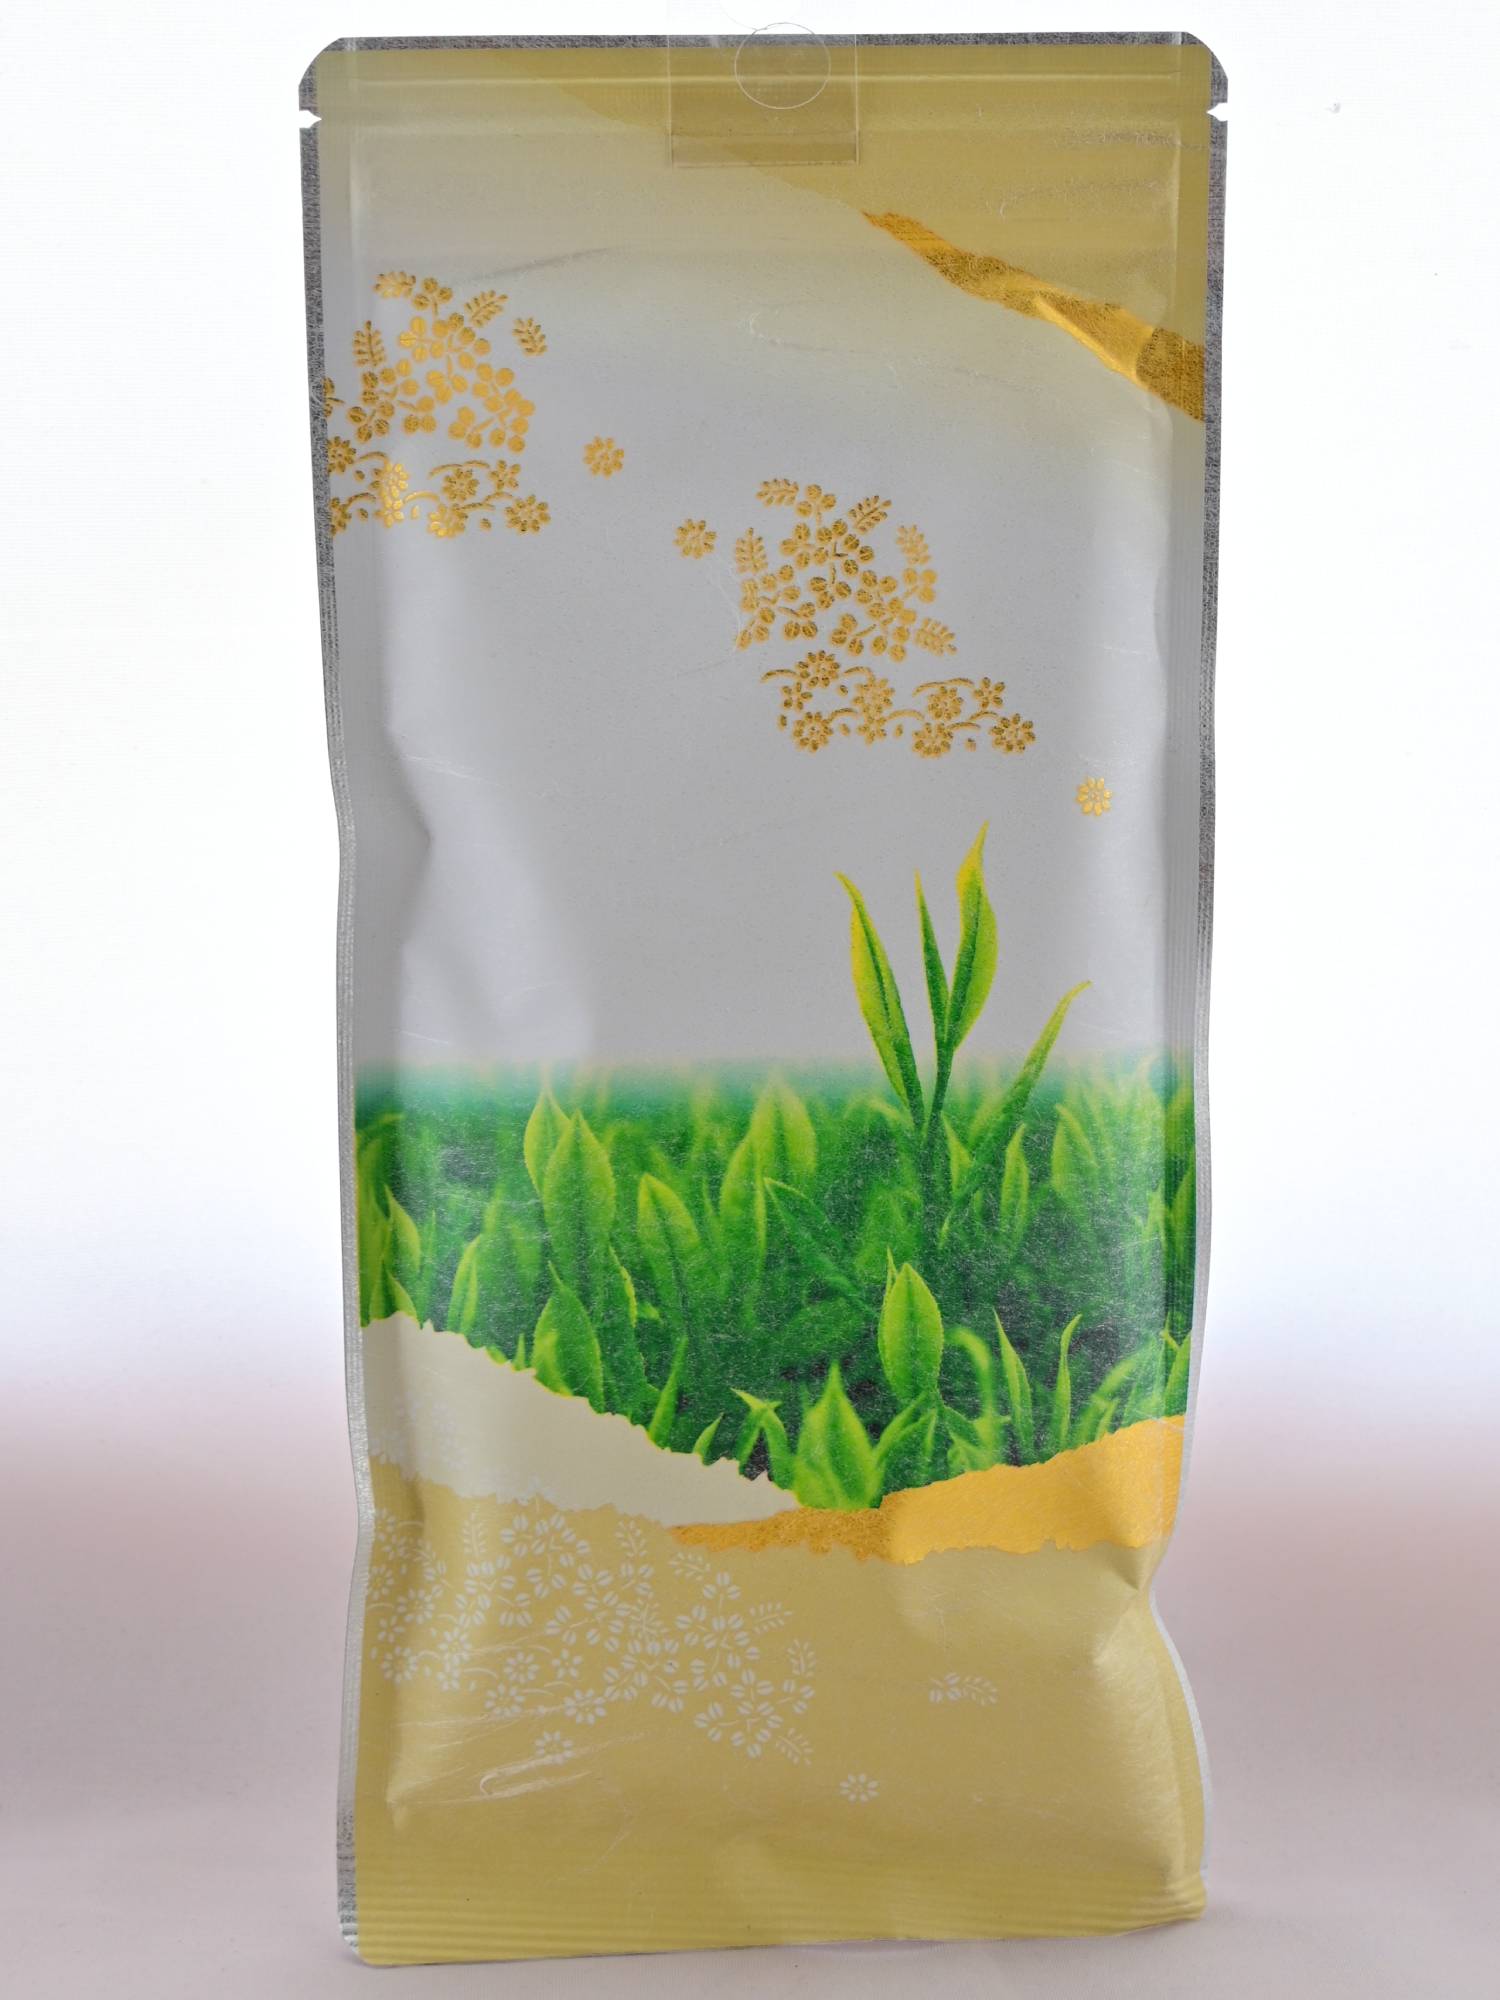 The plastic Kamacha packet has soft gold on the top and bottoms of it, with an image of the tops of tea bushes in the middle. There are golden flower fields and mountains painted along the edges. At the very top is a line of the resealable package closure.